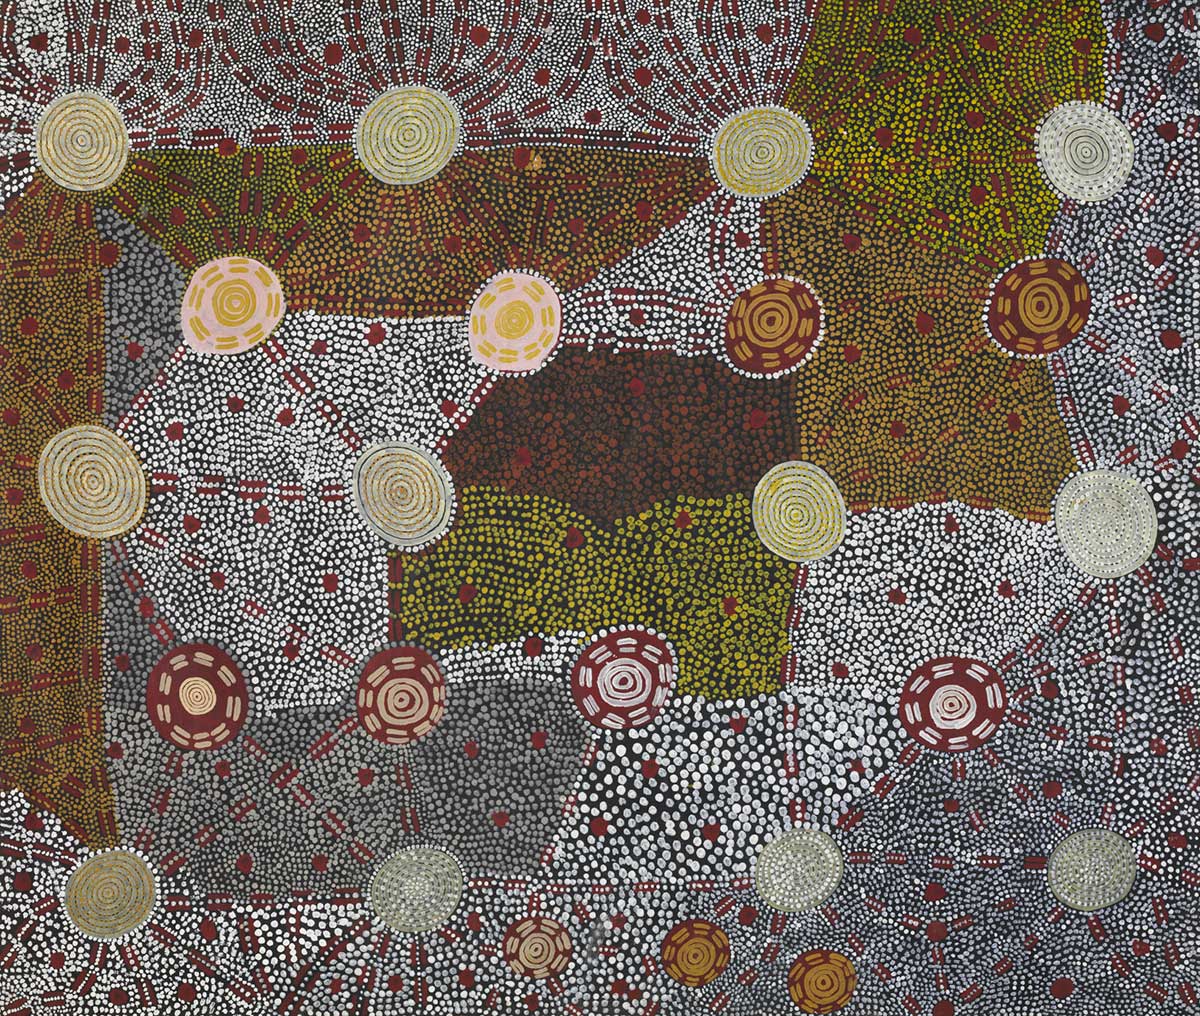 A painting depicting numerous circles, some fully concentric and others partially concentric with fragmented lines around circumference. Linked with brown fragmented parallel lines. Background black with large brown spots, and dots in patches of white, yellow, brown and green.